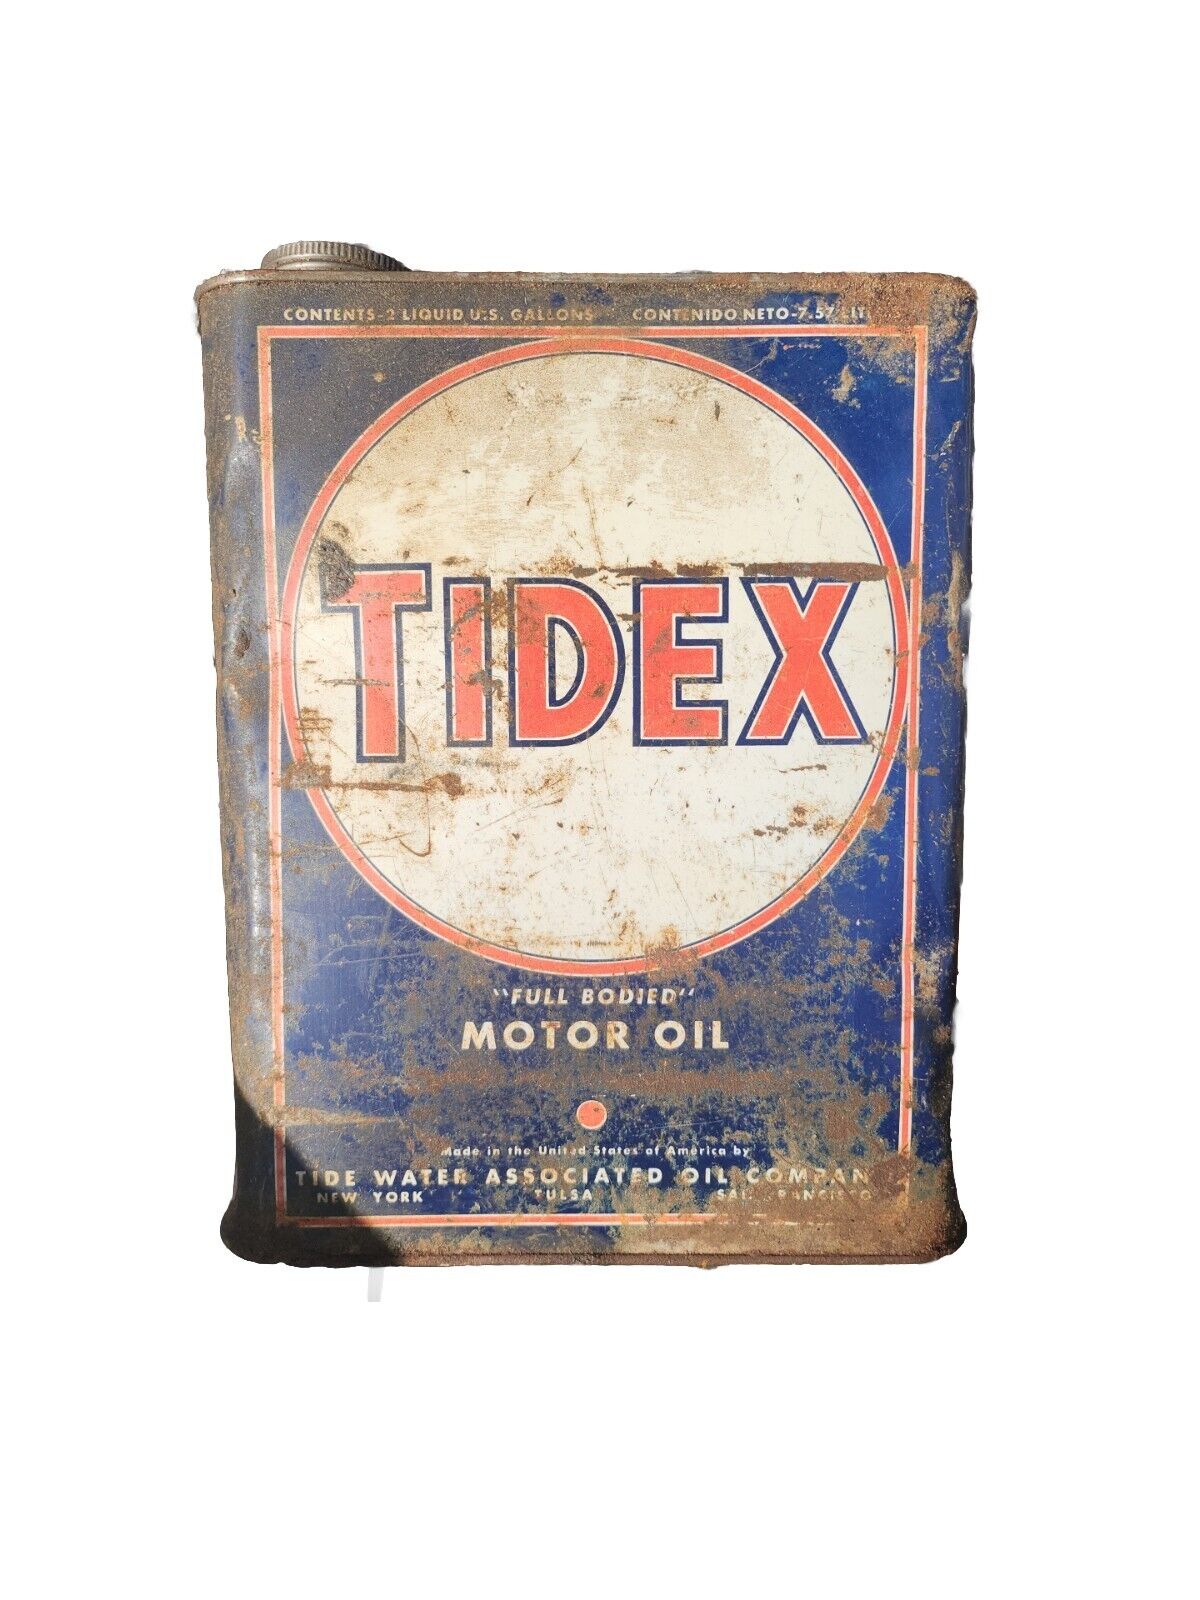 Vintage Tidex Motor Oil Can 2 GALLON RED, WHITE & BLUE CAN METAL TIN W HANDLE